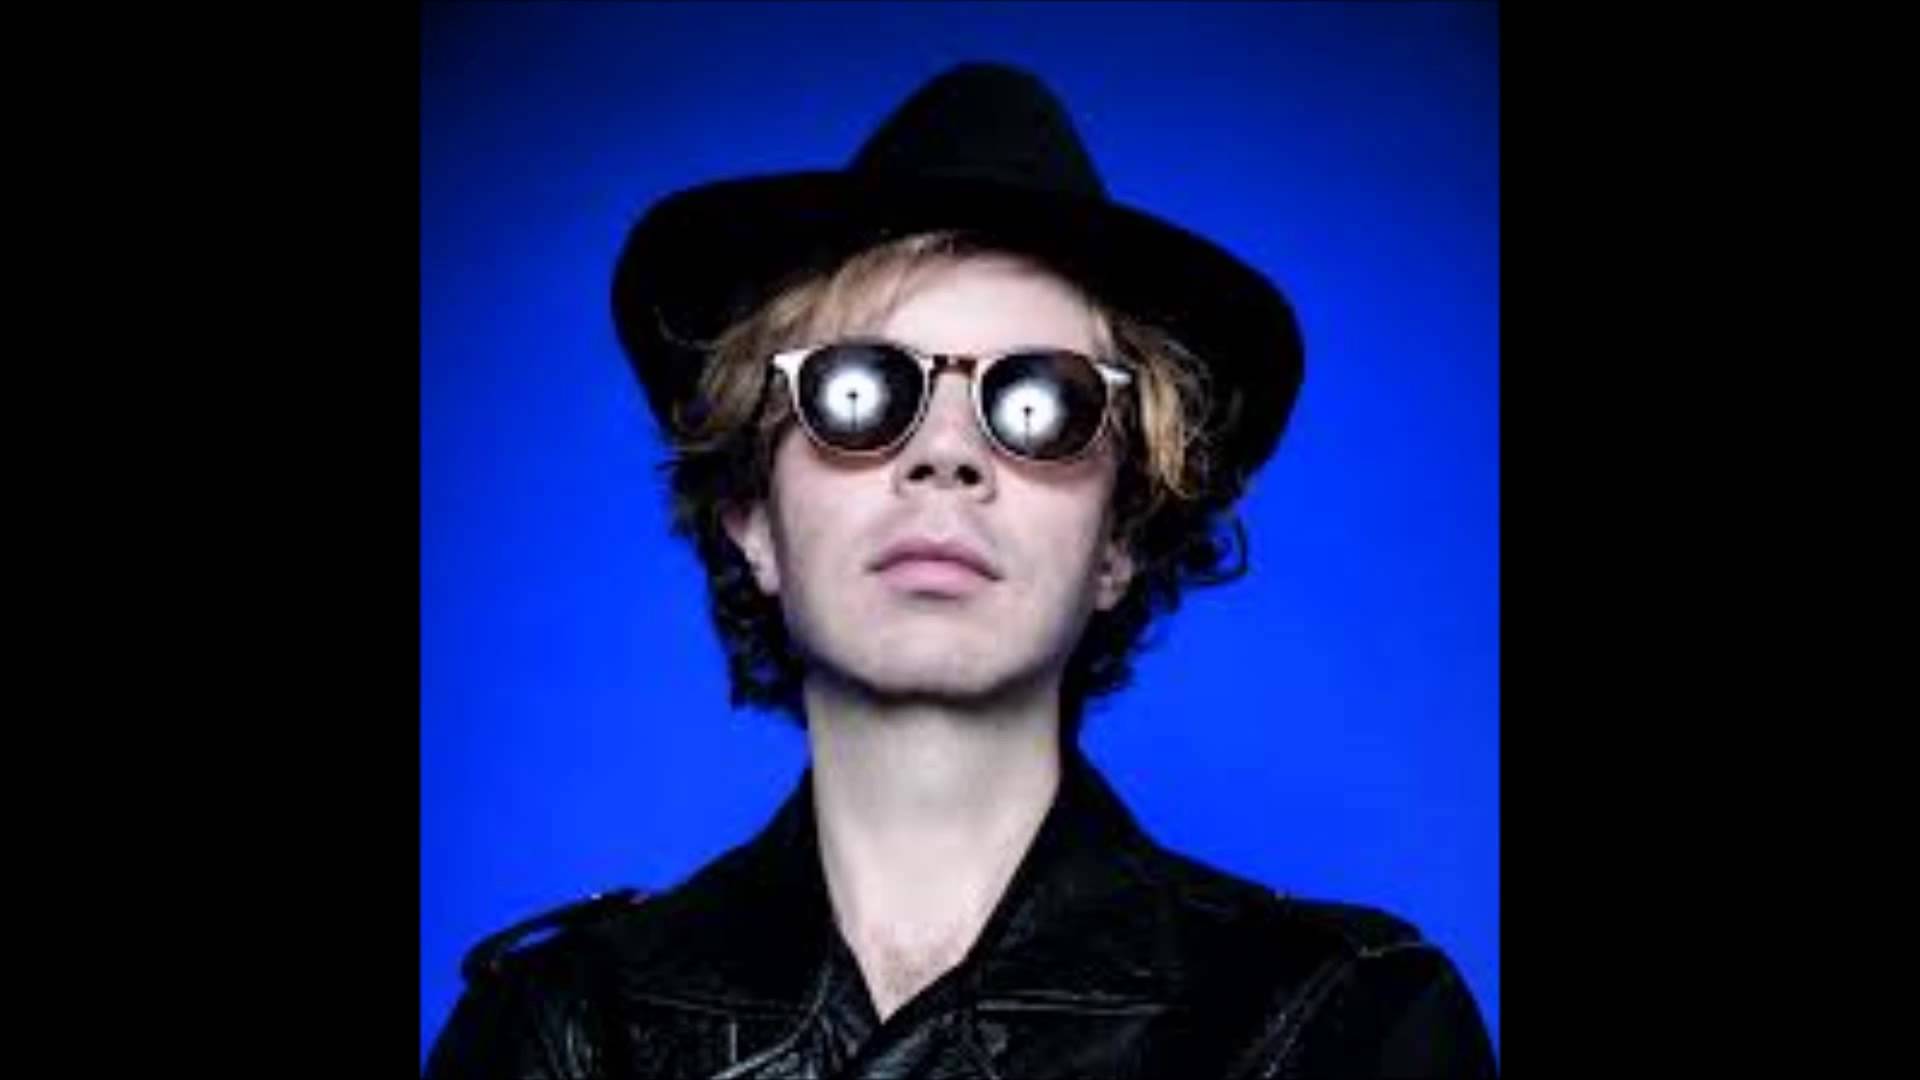 Beck - I just started hating some people today